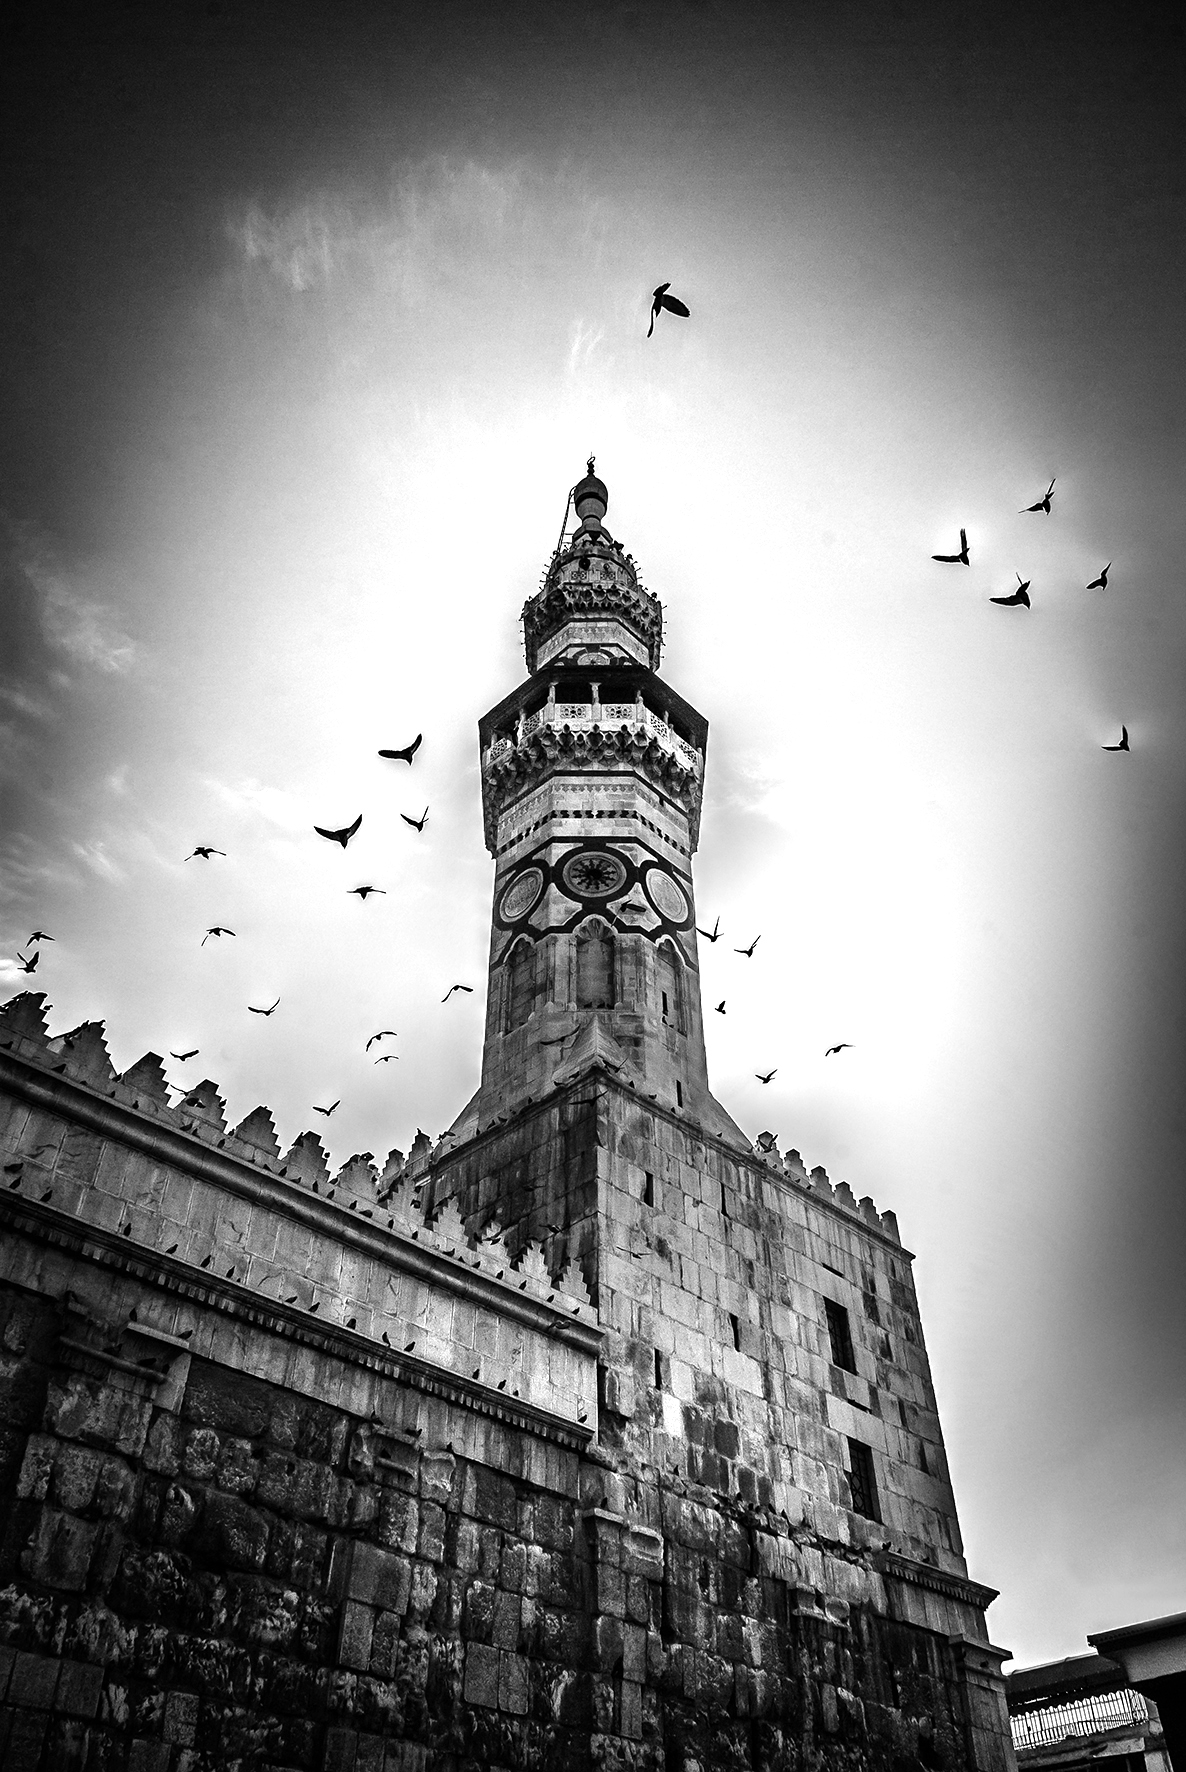 The Umayyad Mosque, also known as the Great Mosque of Damascus, located in the old city of Damascus, is one of the largest and oldest mosques in the world.